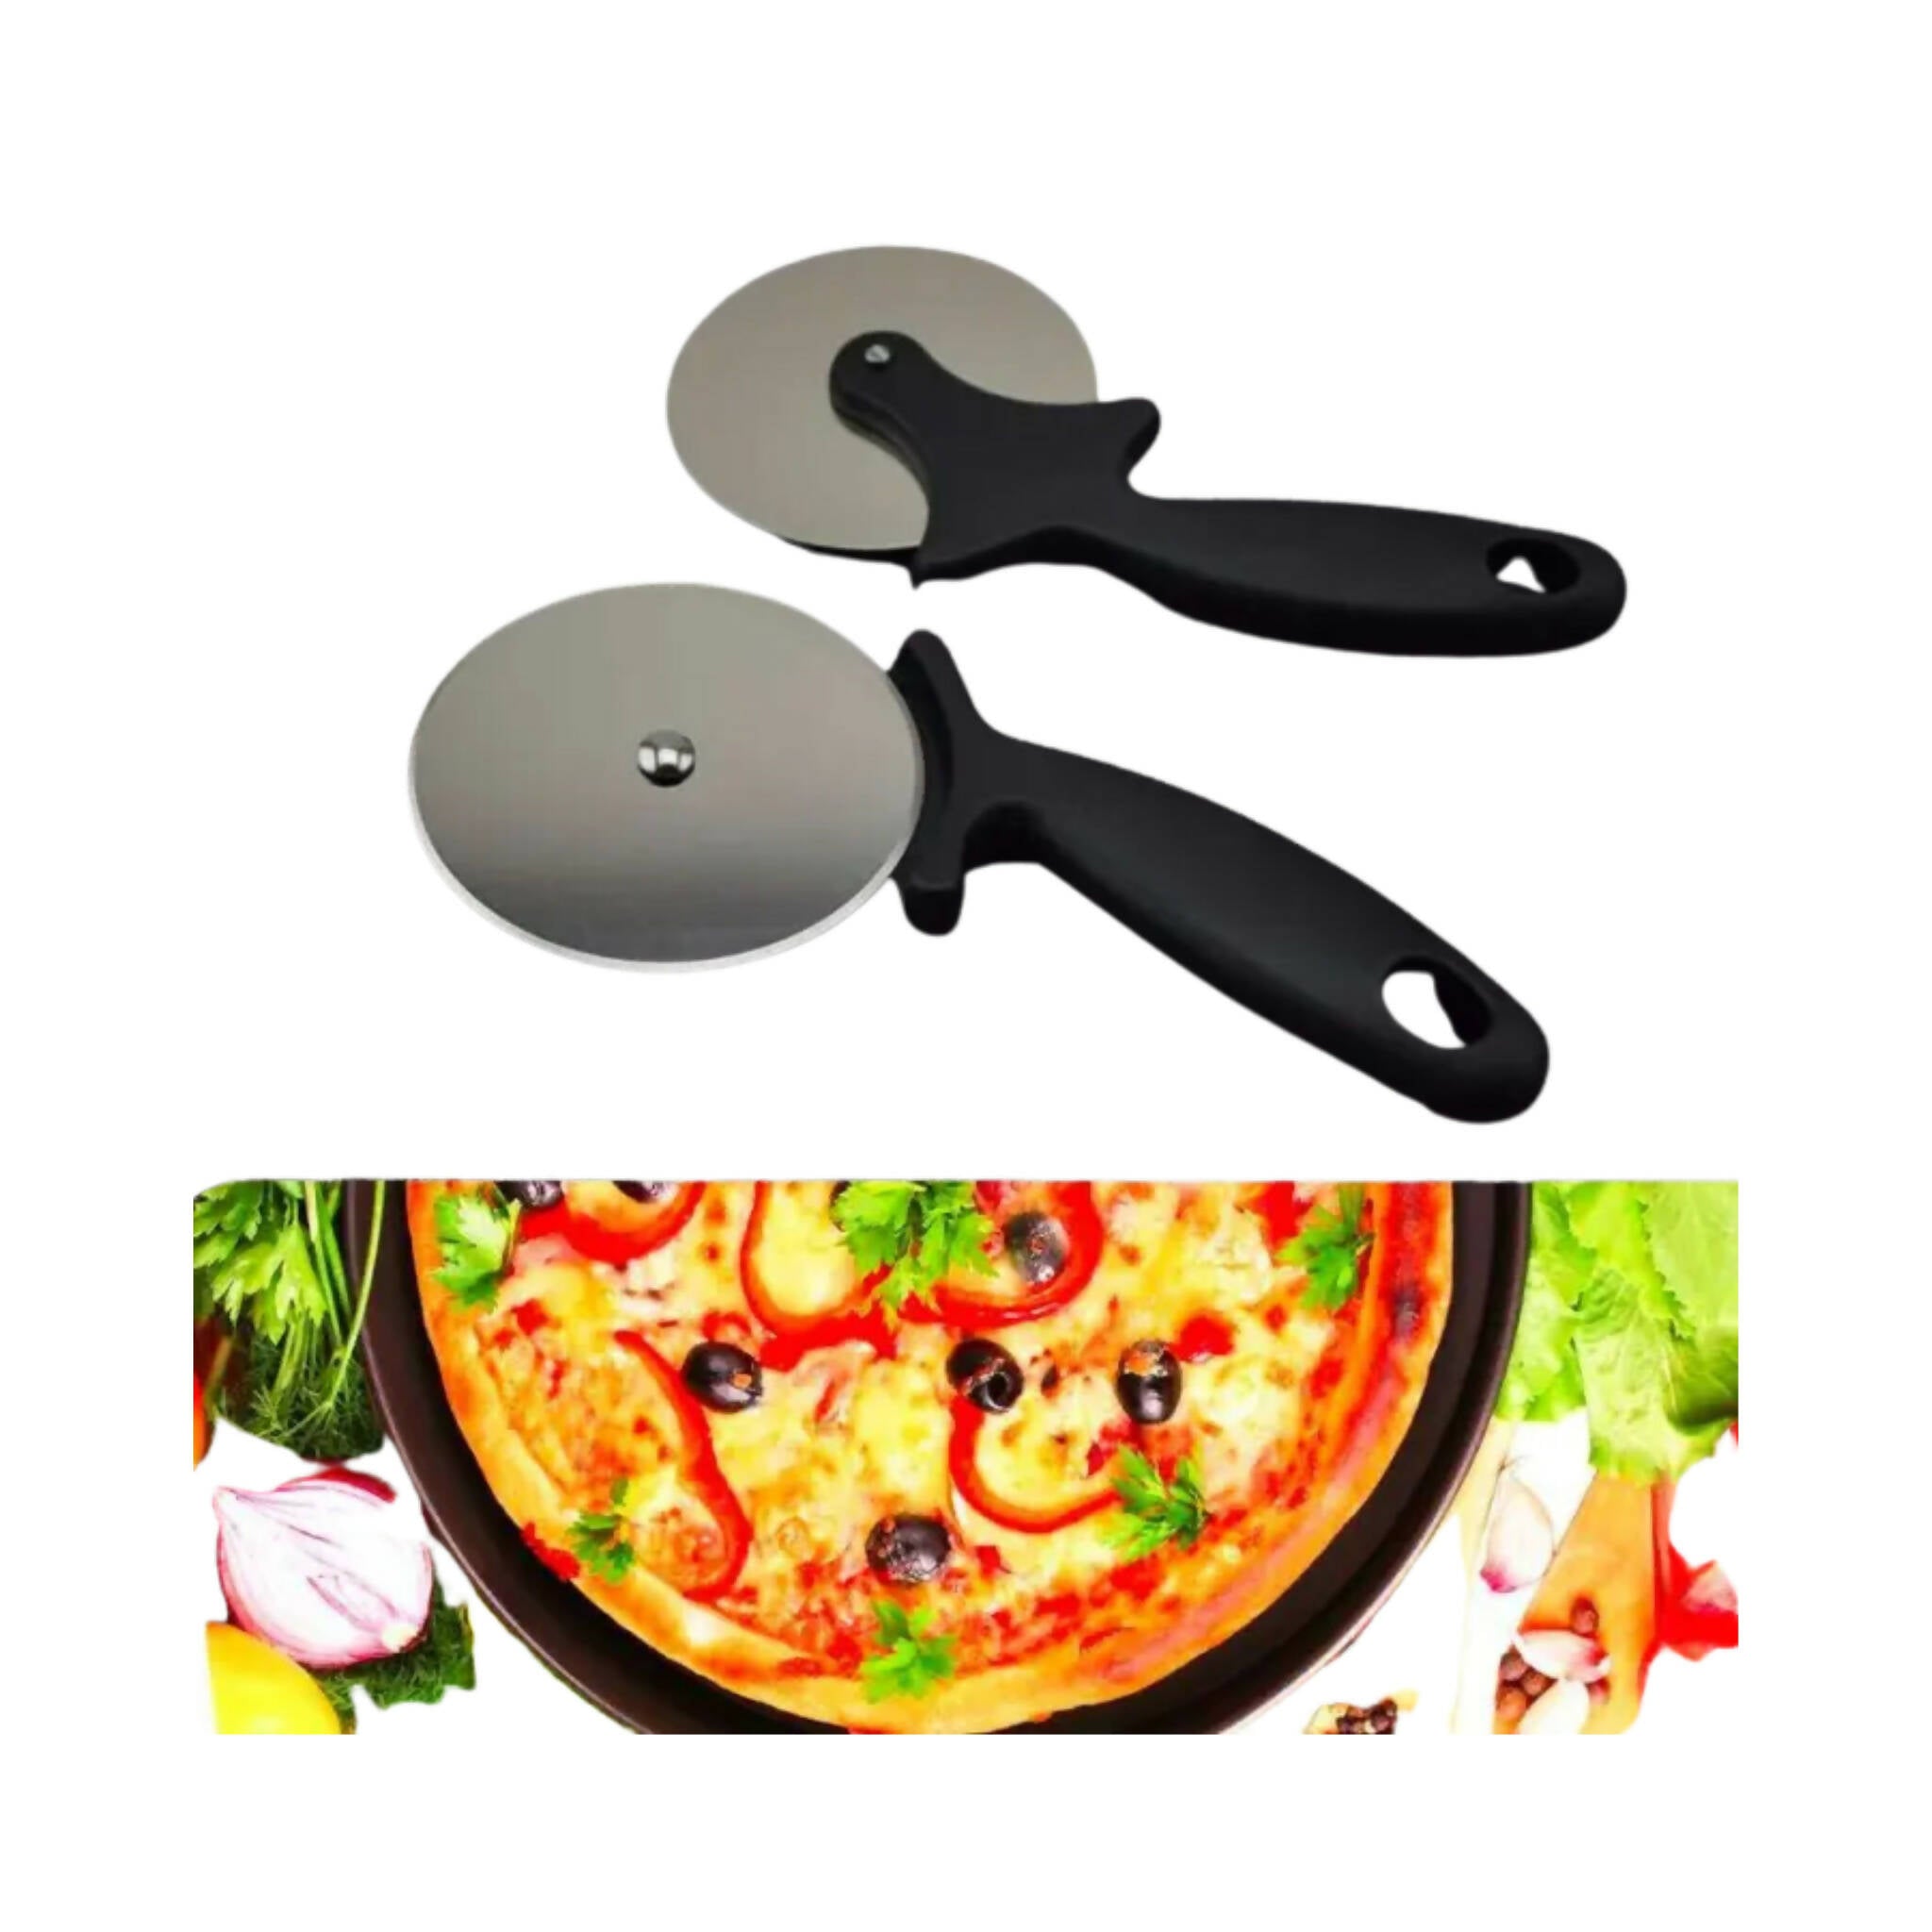 Pizza Cutter/Slicer, Slice with precision!